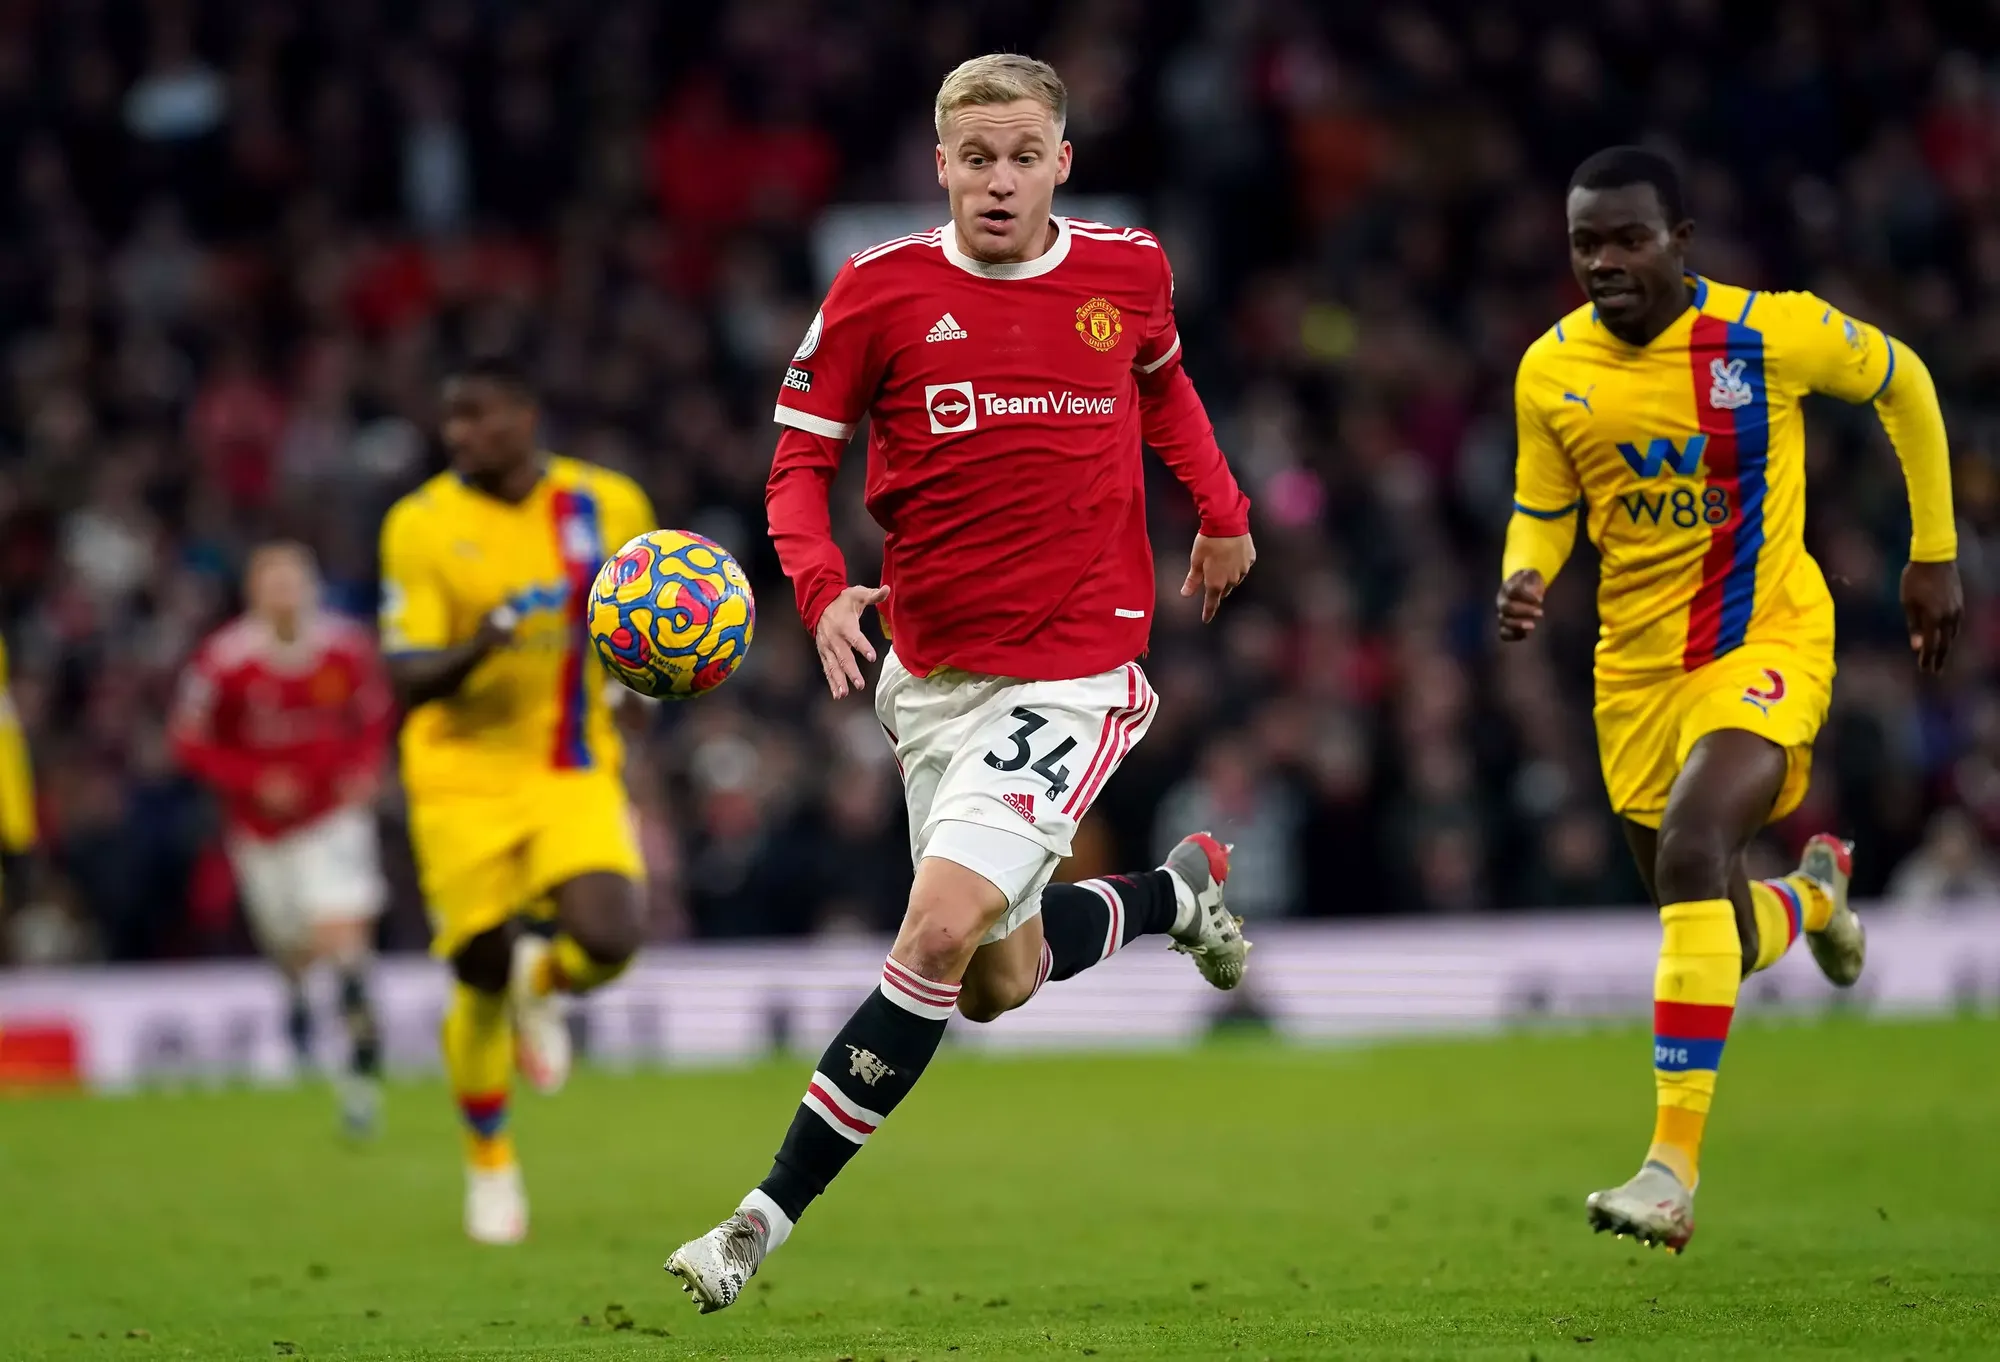 Donny van de Beek in action for Manchester United against Crystal Palace